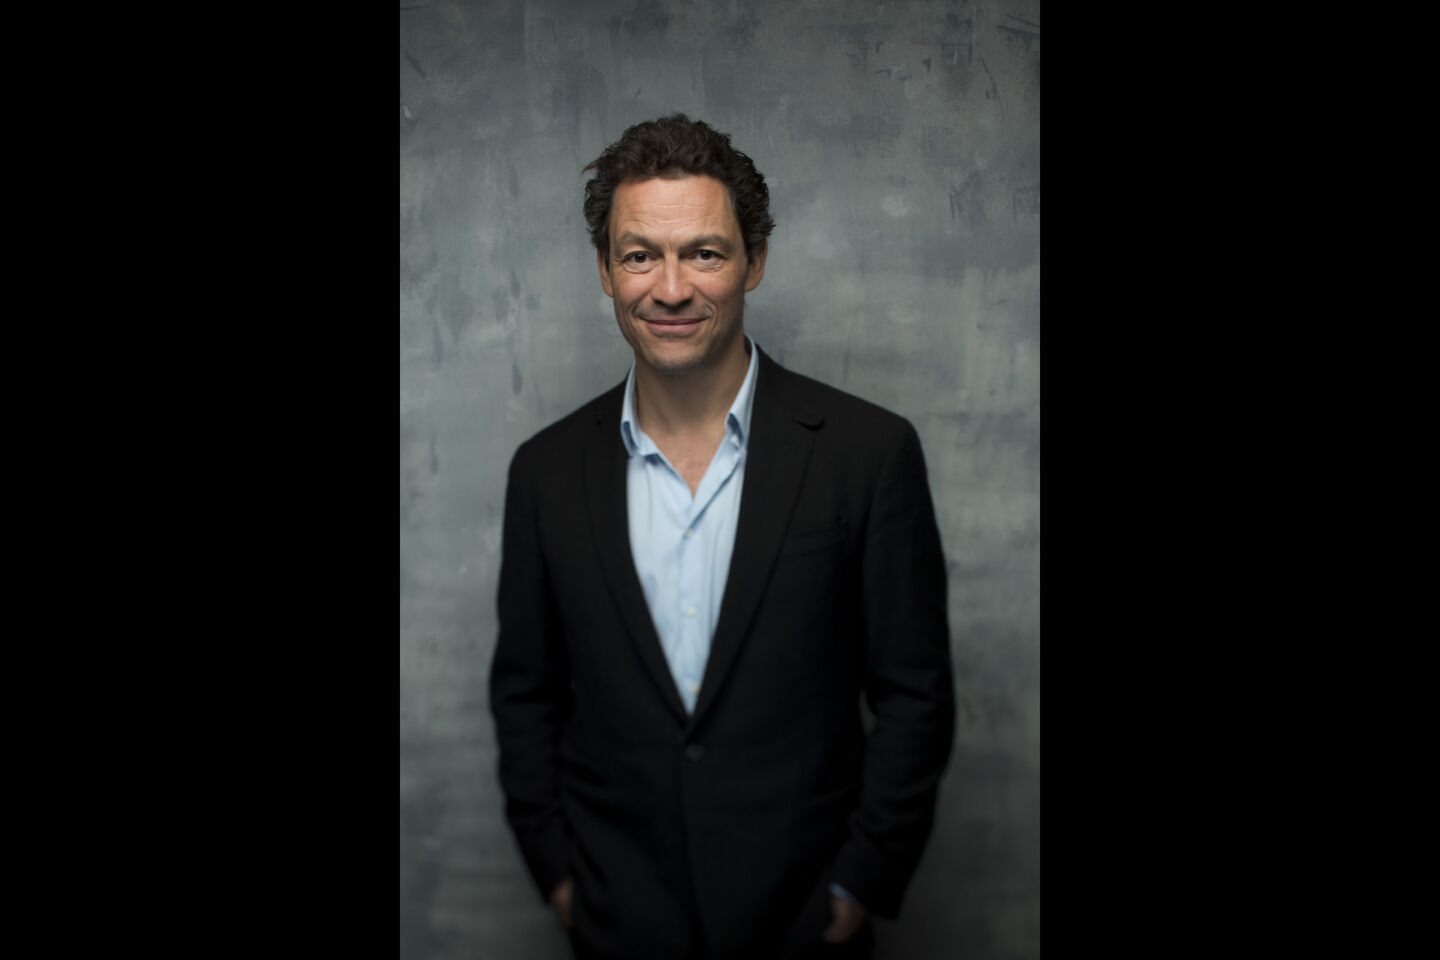 Actor Dominic West from the film "Collette."